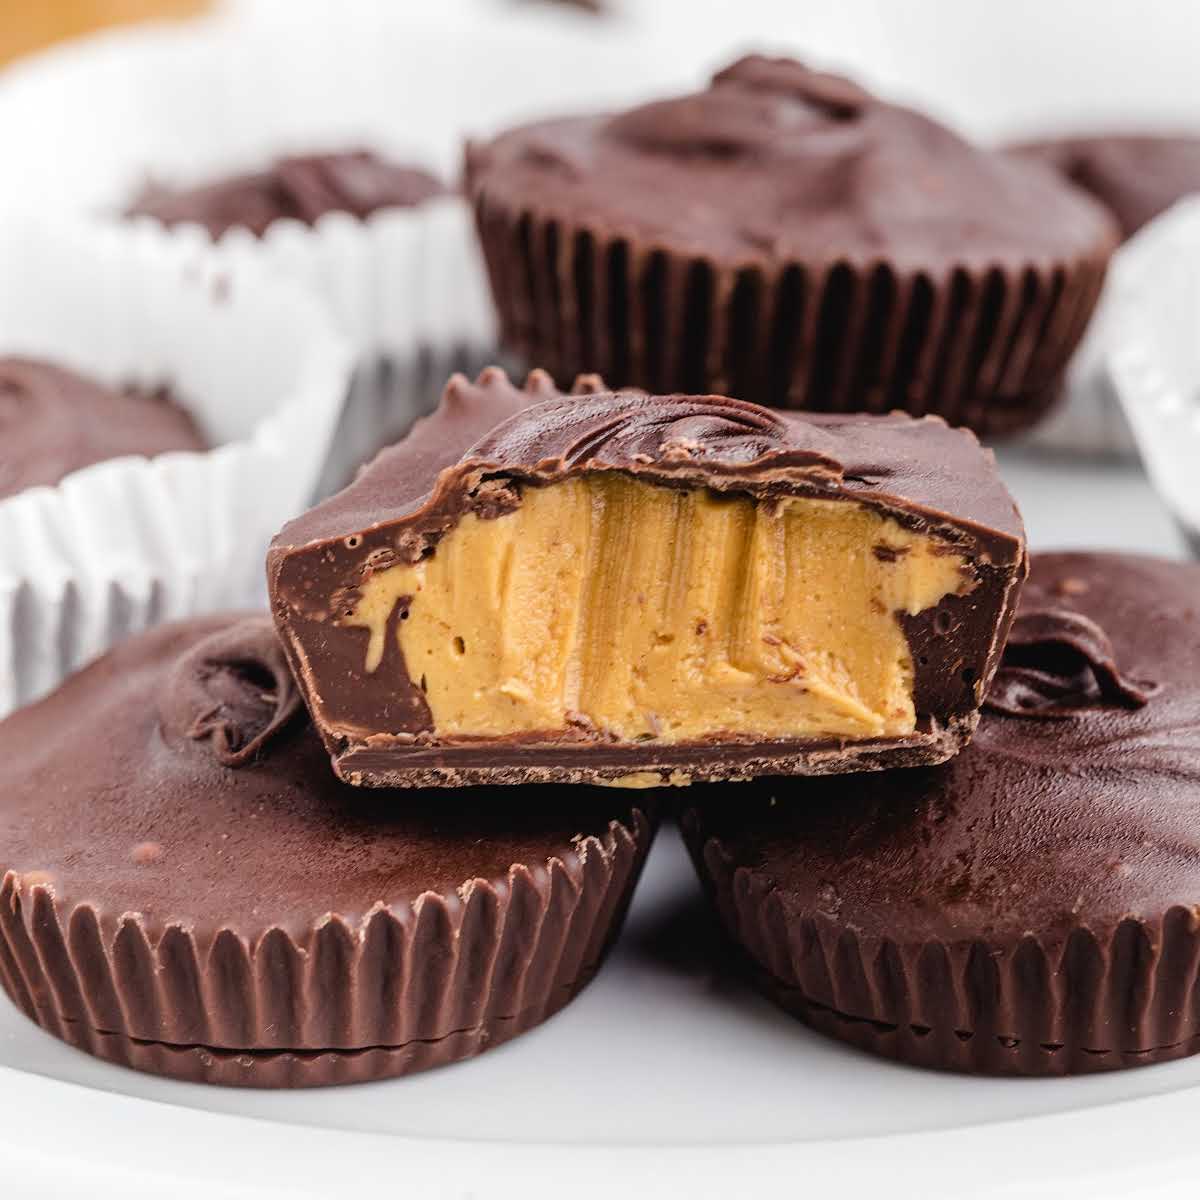 Peanut Butter Cup Geometry - (Parentheses), [Brackets] and {Braces}